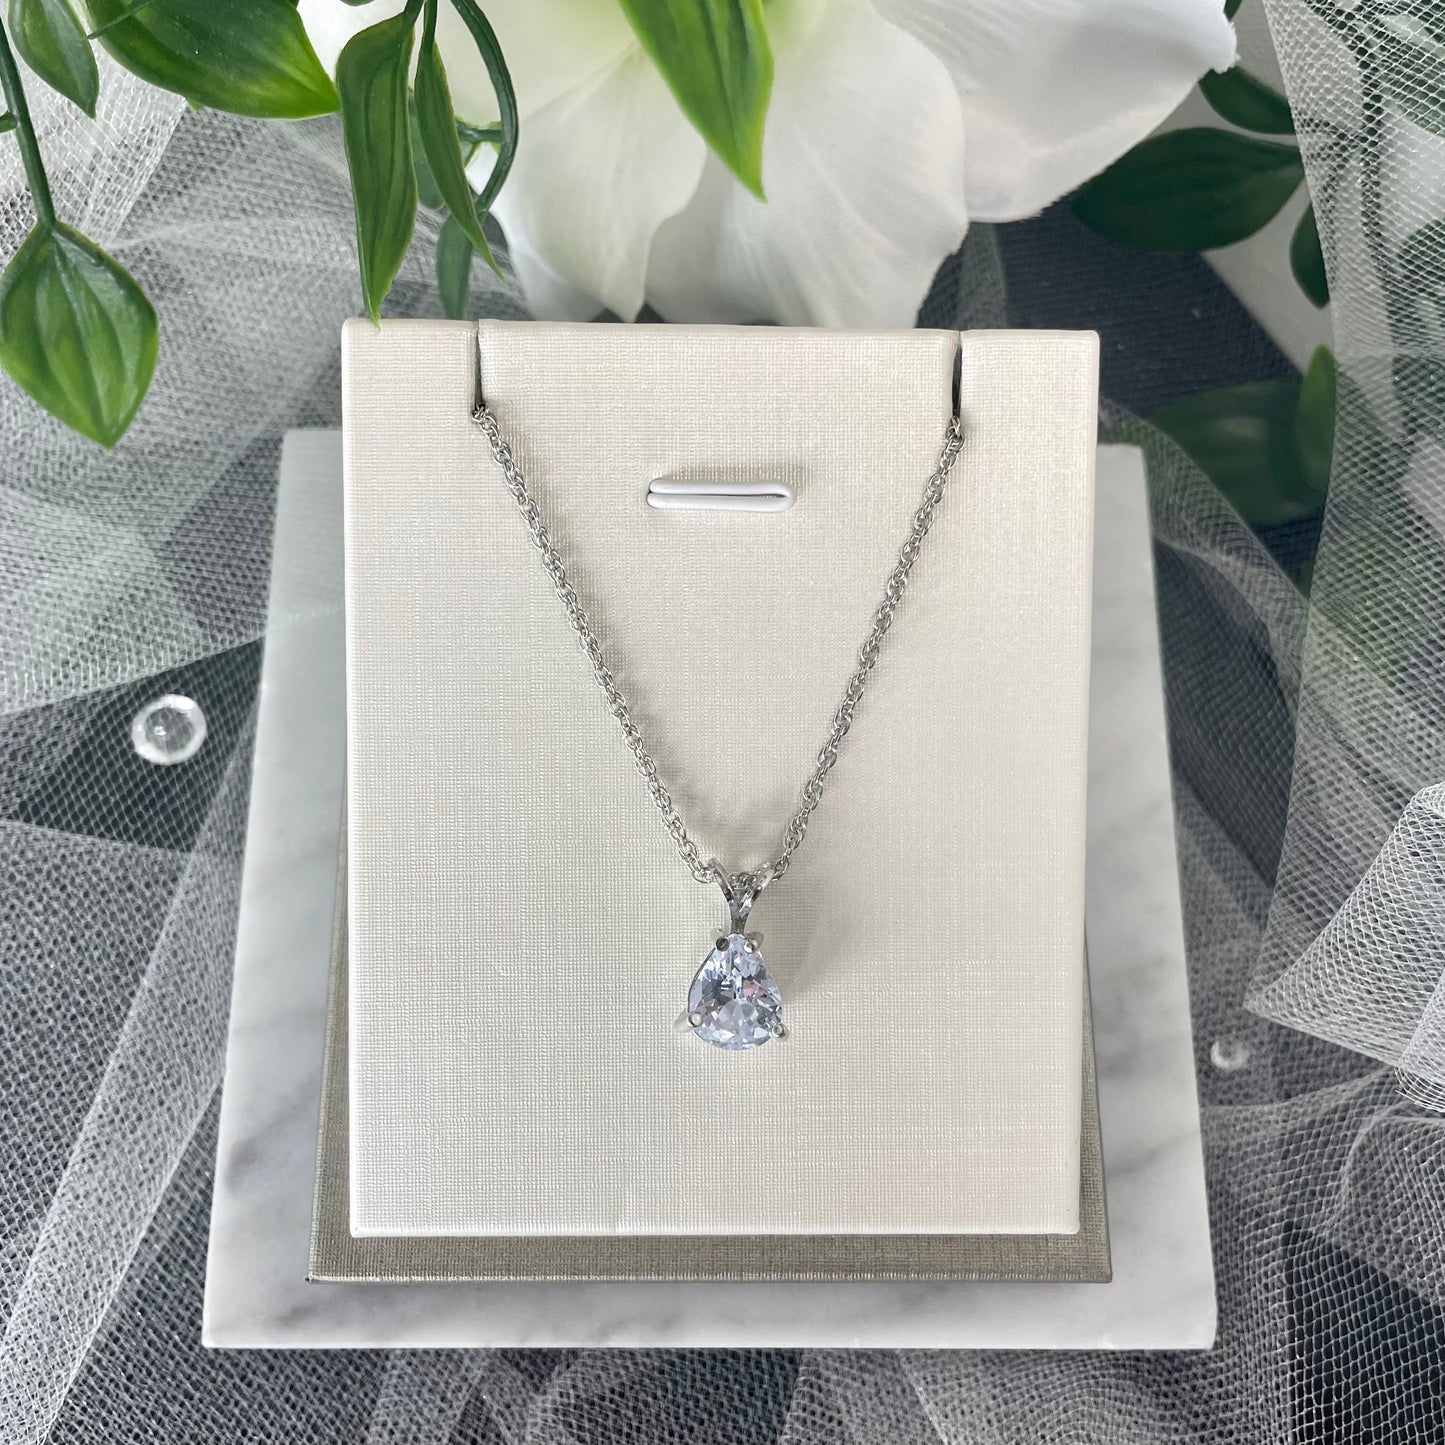 Eliana silver plated necklace with a teardrop cubic glass diamond pendant held by a 'V' silver fixture on a double cross chain.